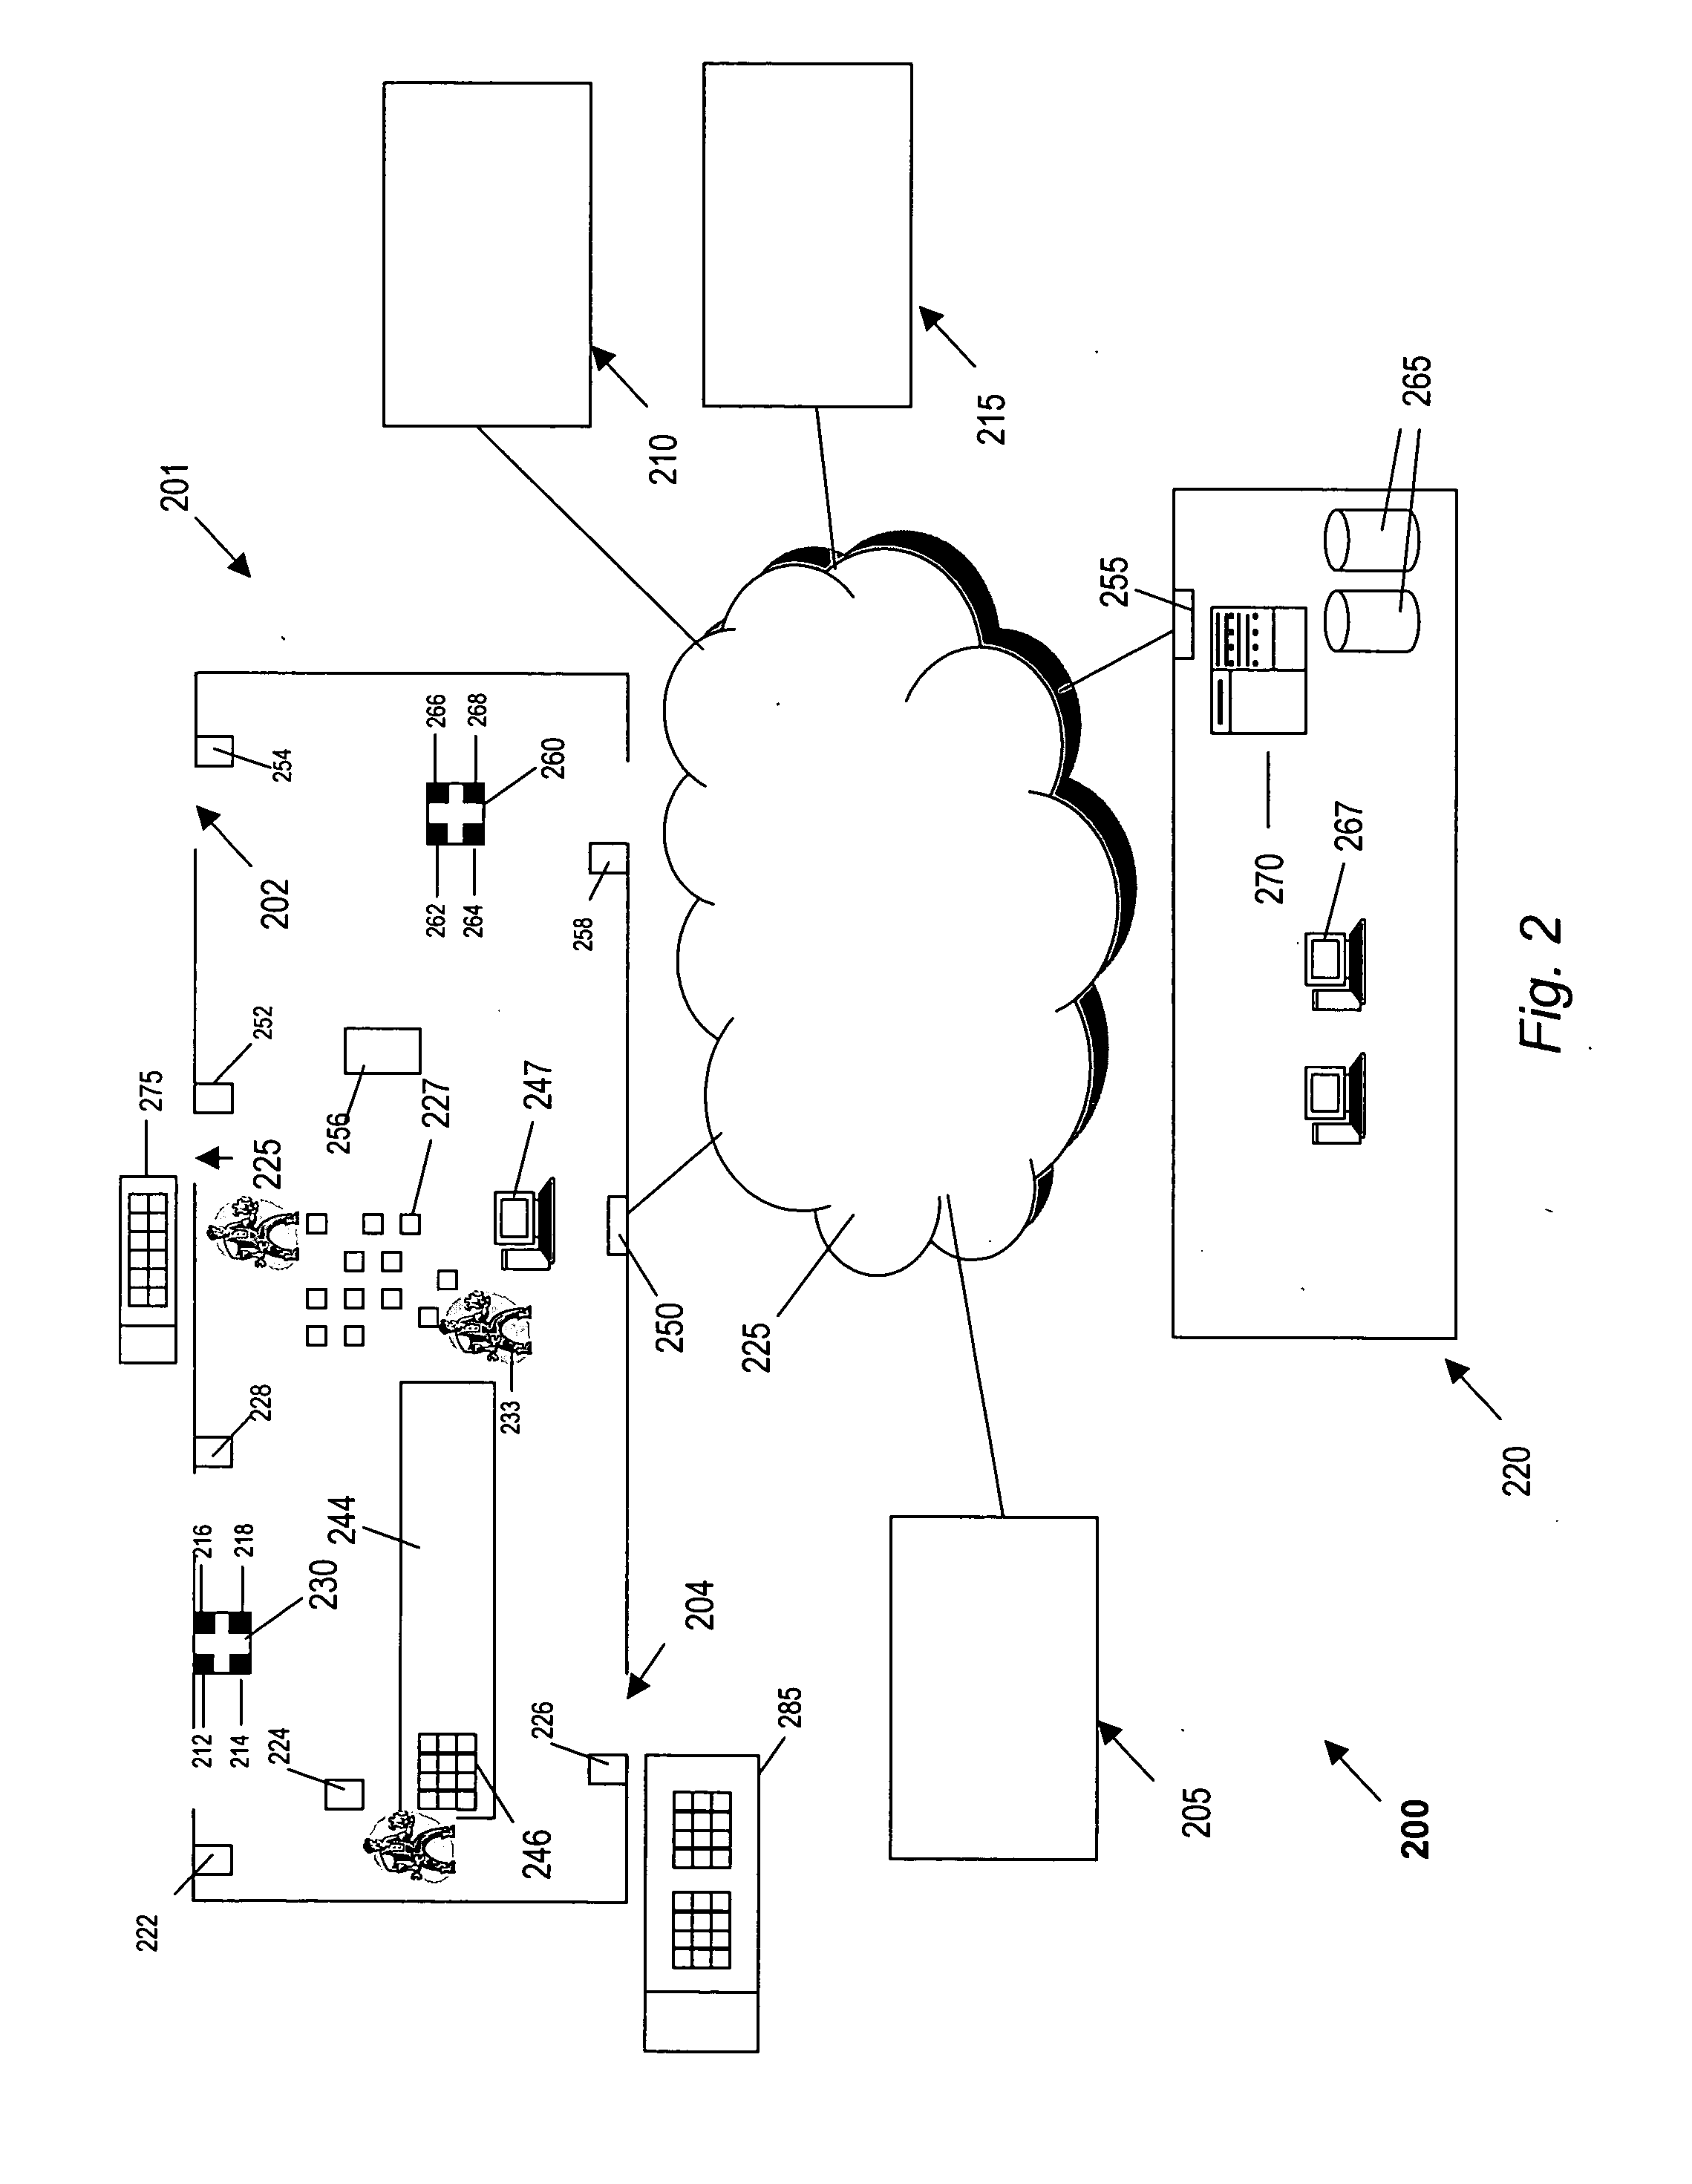 Methods and devices for locating and uniquely provisioning RFID devices